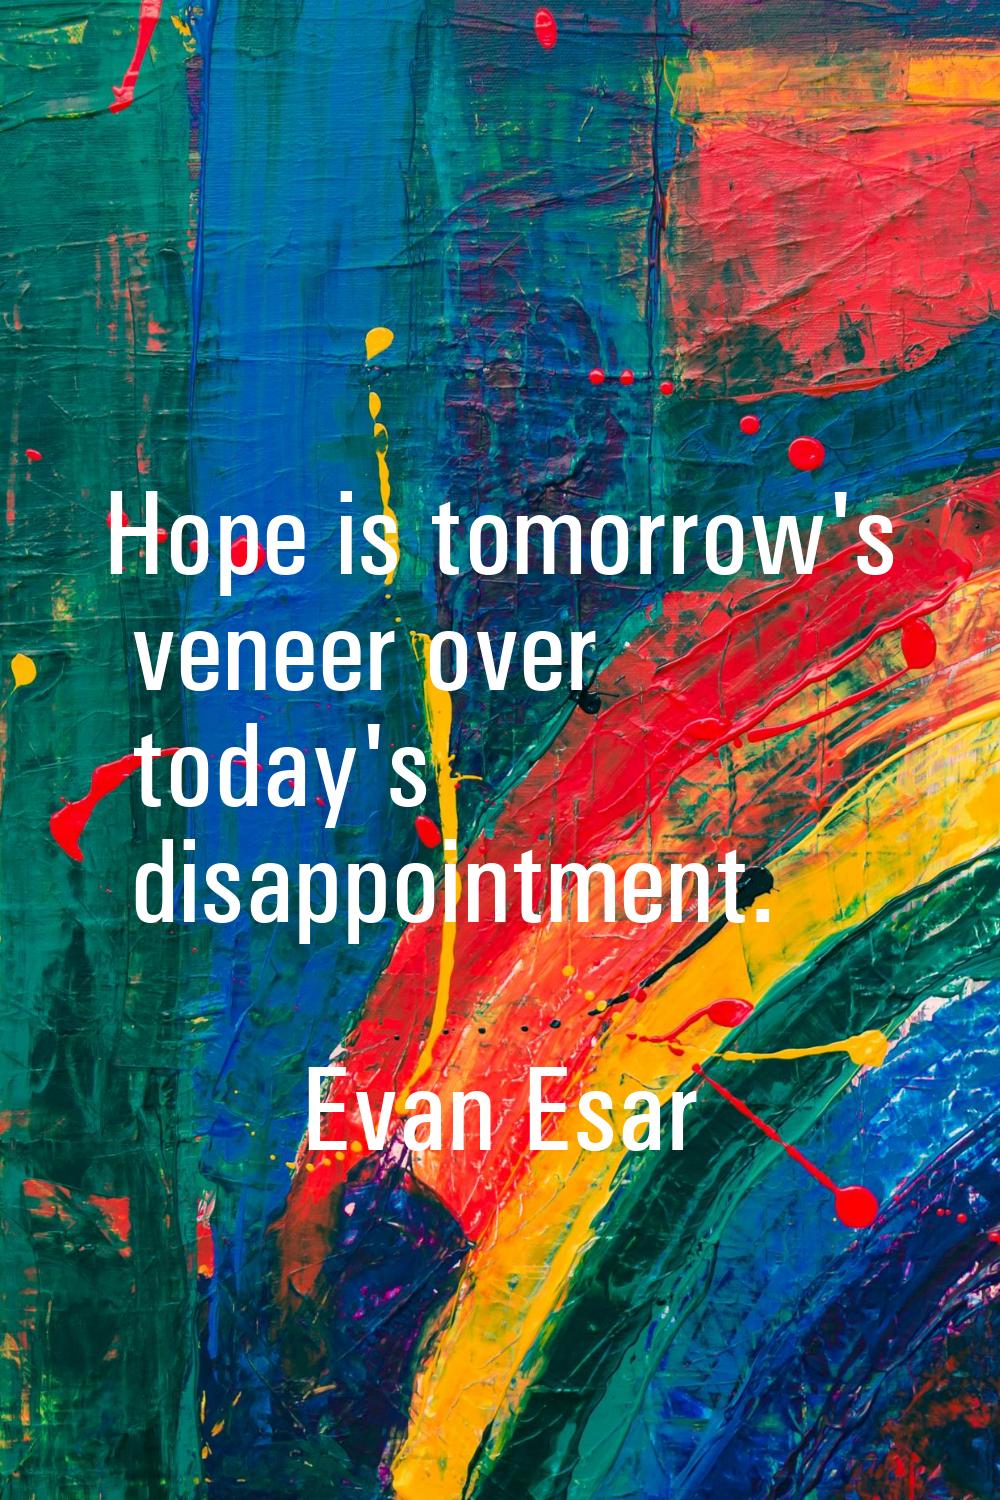 Hope is tomorrow's veneer over today's disappointment.